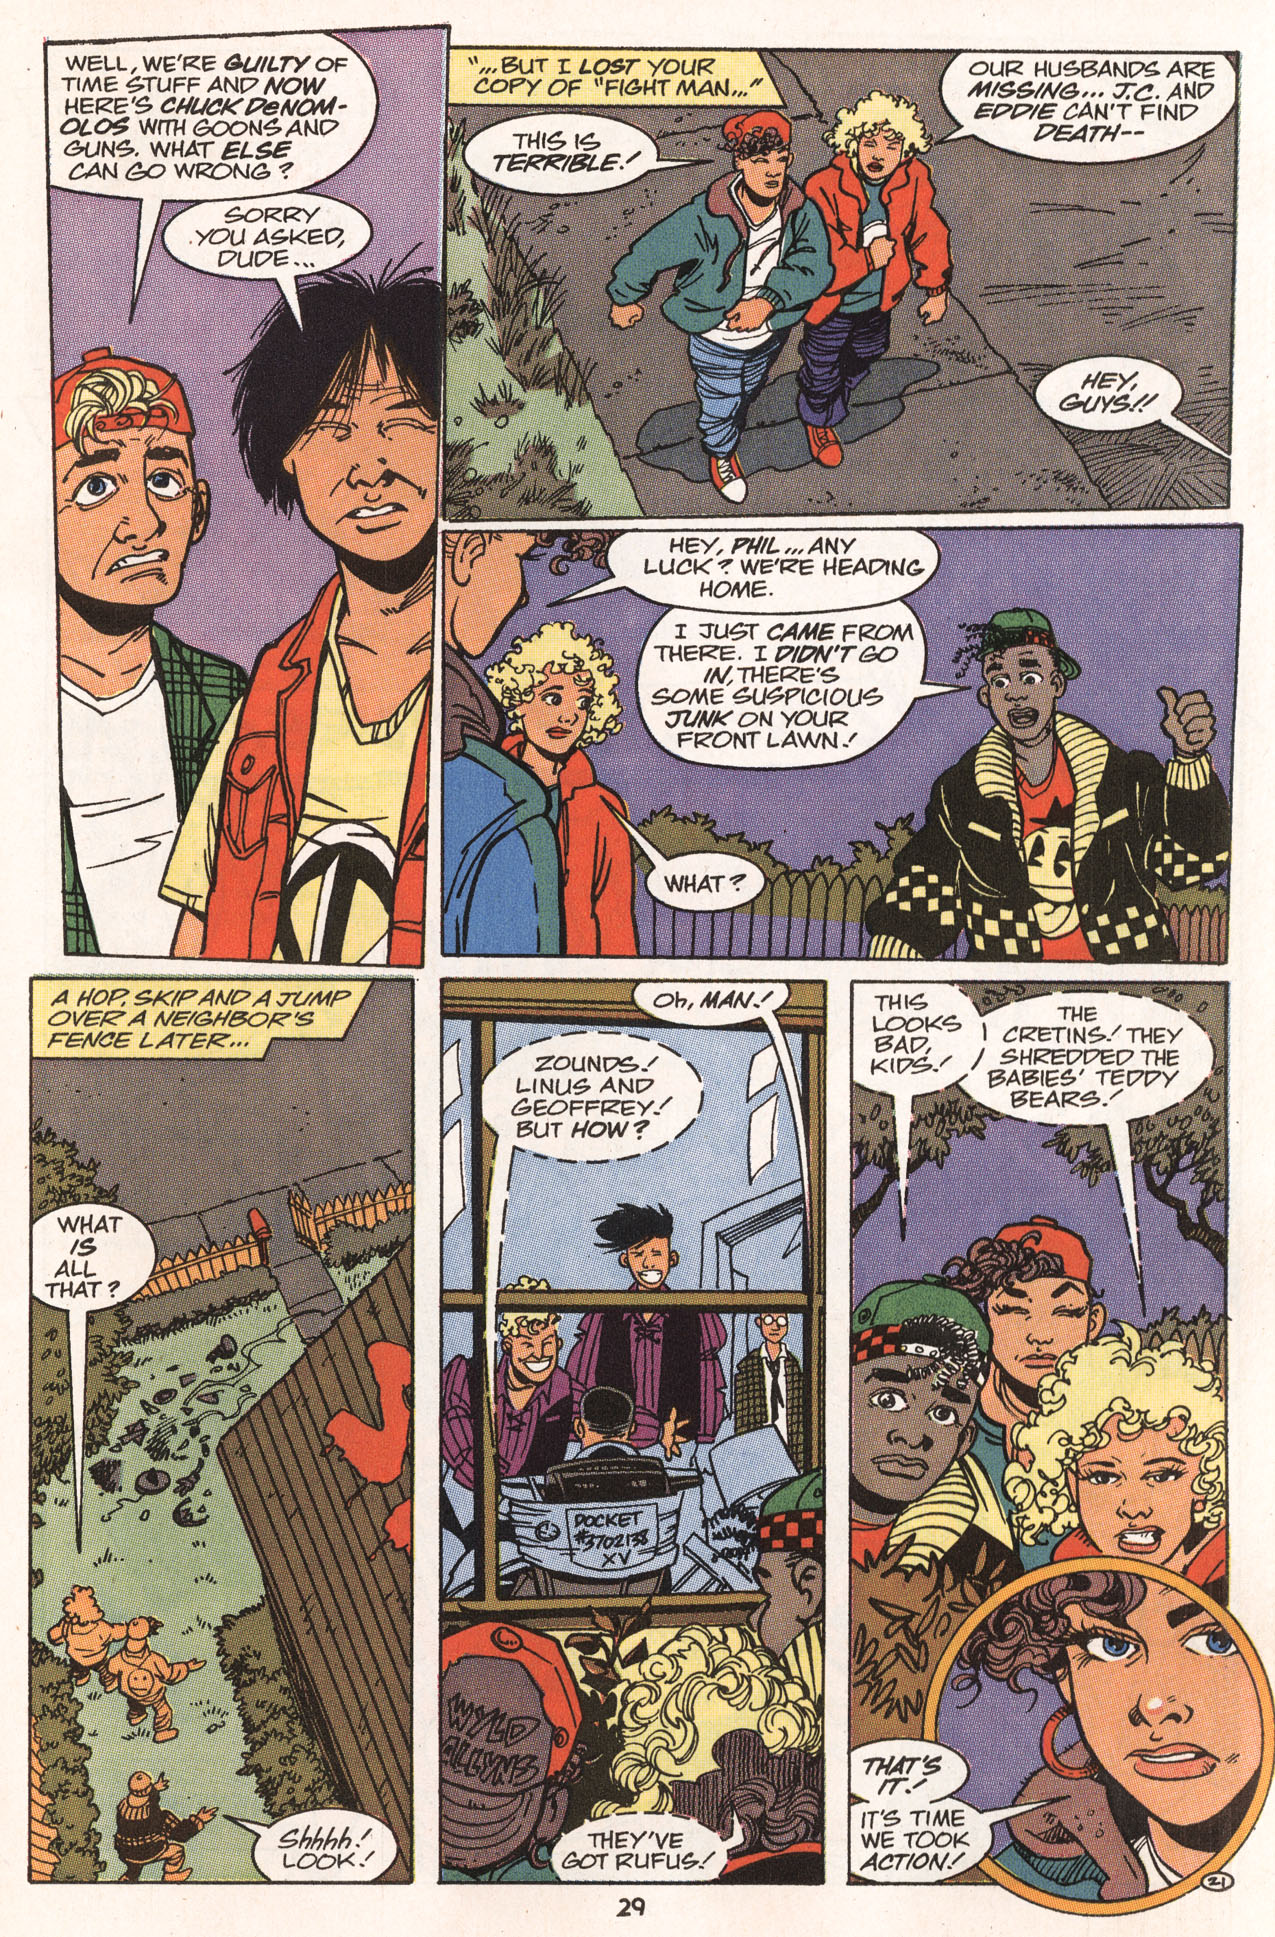 Read online Bill & Ted's Excellent Comic Book comic -  Issue #6 - 29